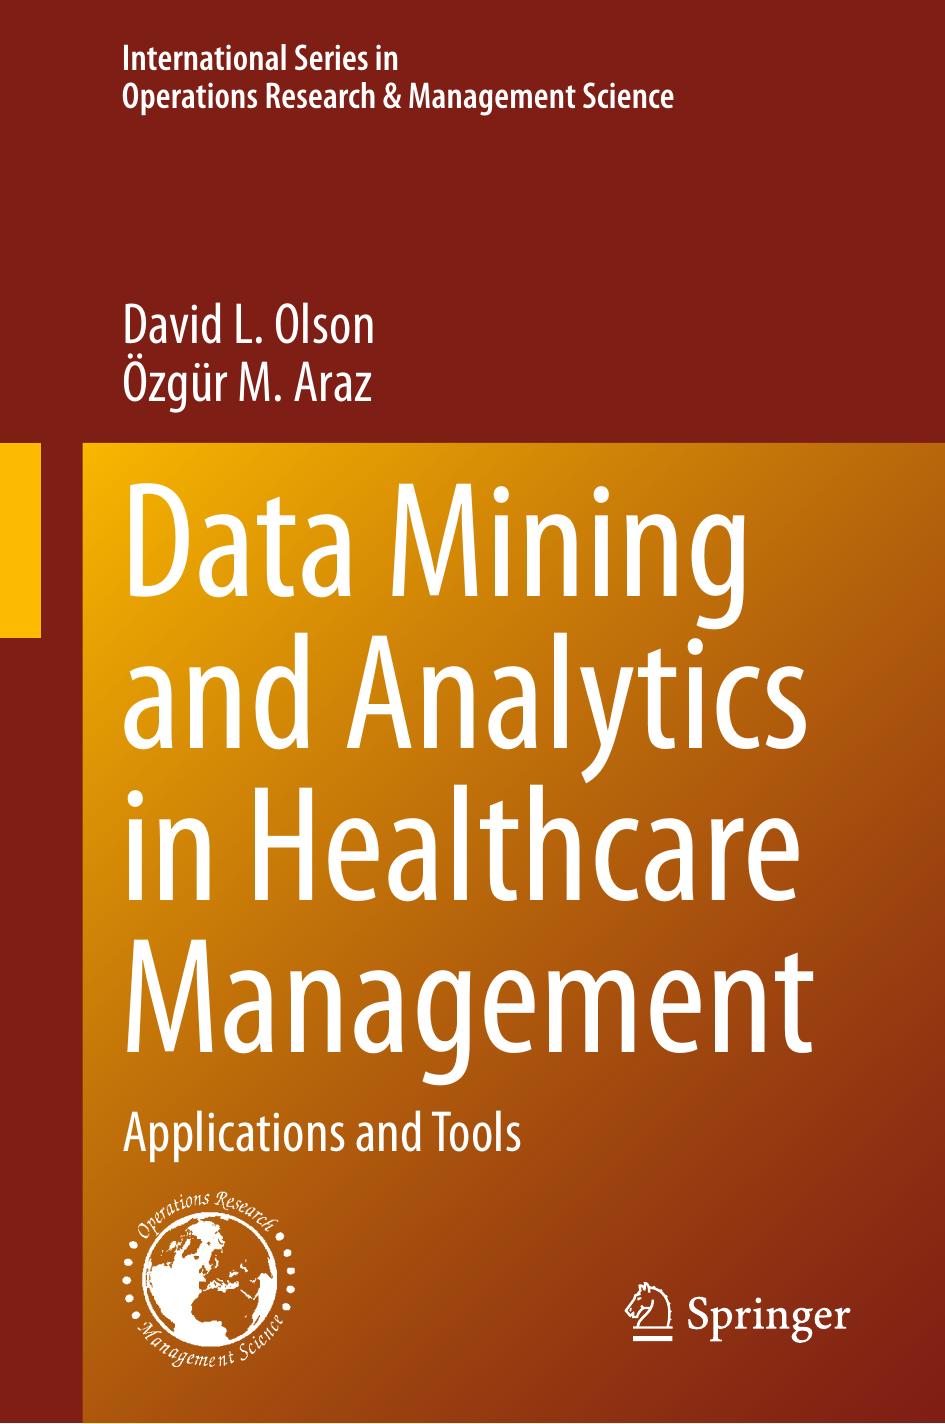 Data Mining and Analytics in Healthcare Management: Applications and Tools by David L. Olson Özgür M. Araz